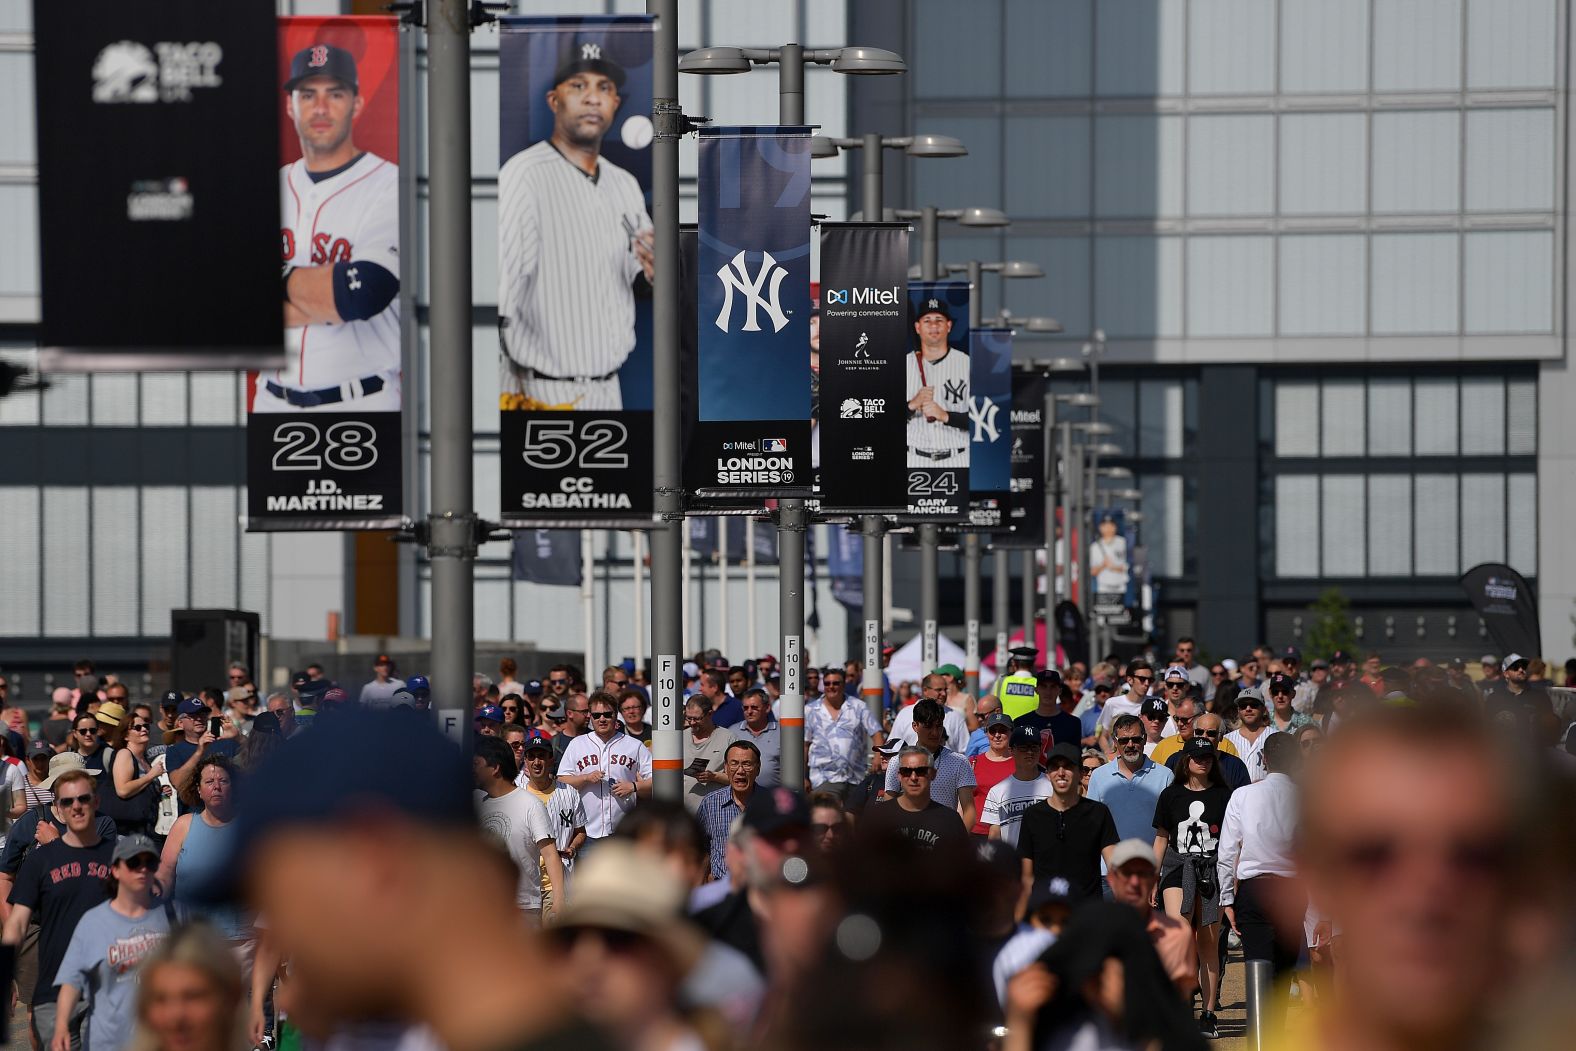 Fans arrive for game one of the MLB London Series between the New York Yankees and the Boston Red Sox at London Stadium on June 29.